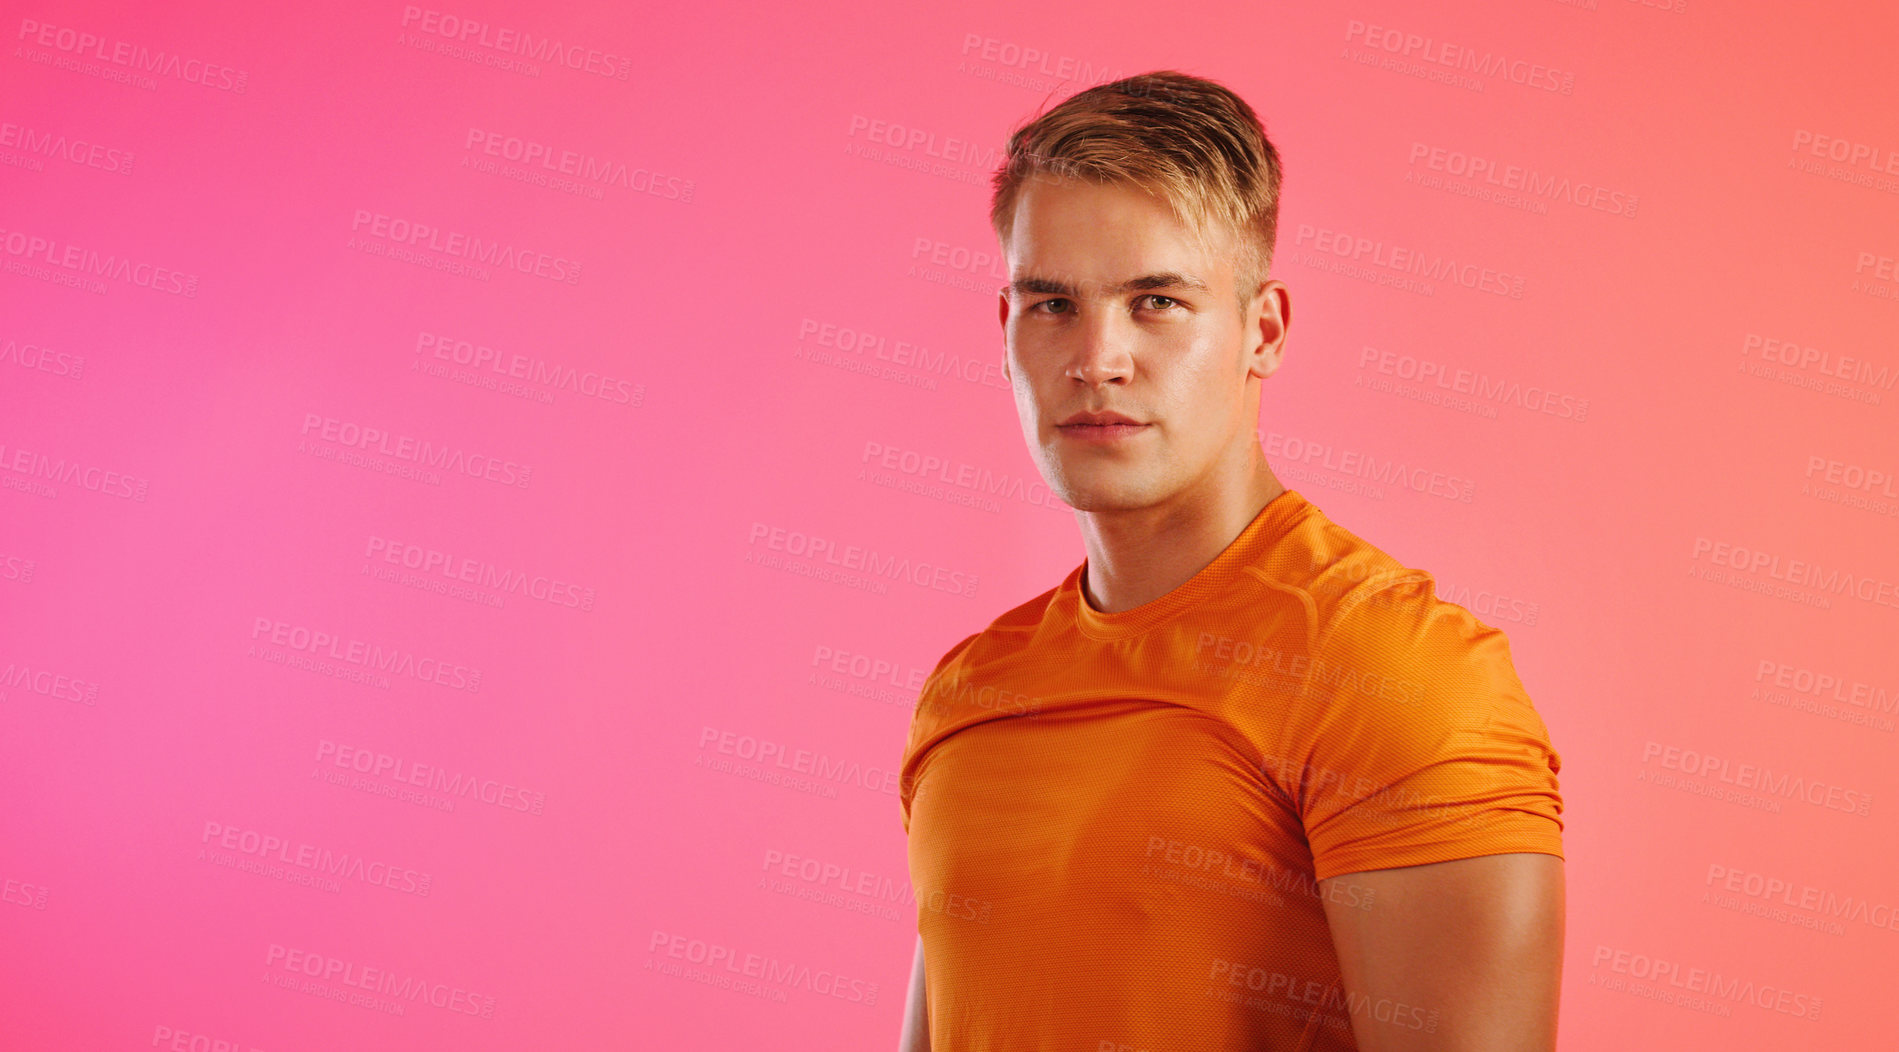 Buy stock photo Studio portrait of a handsome young man posing against a peach background